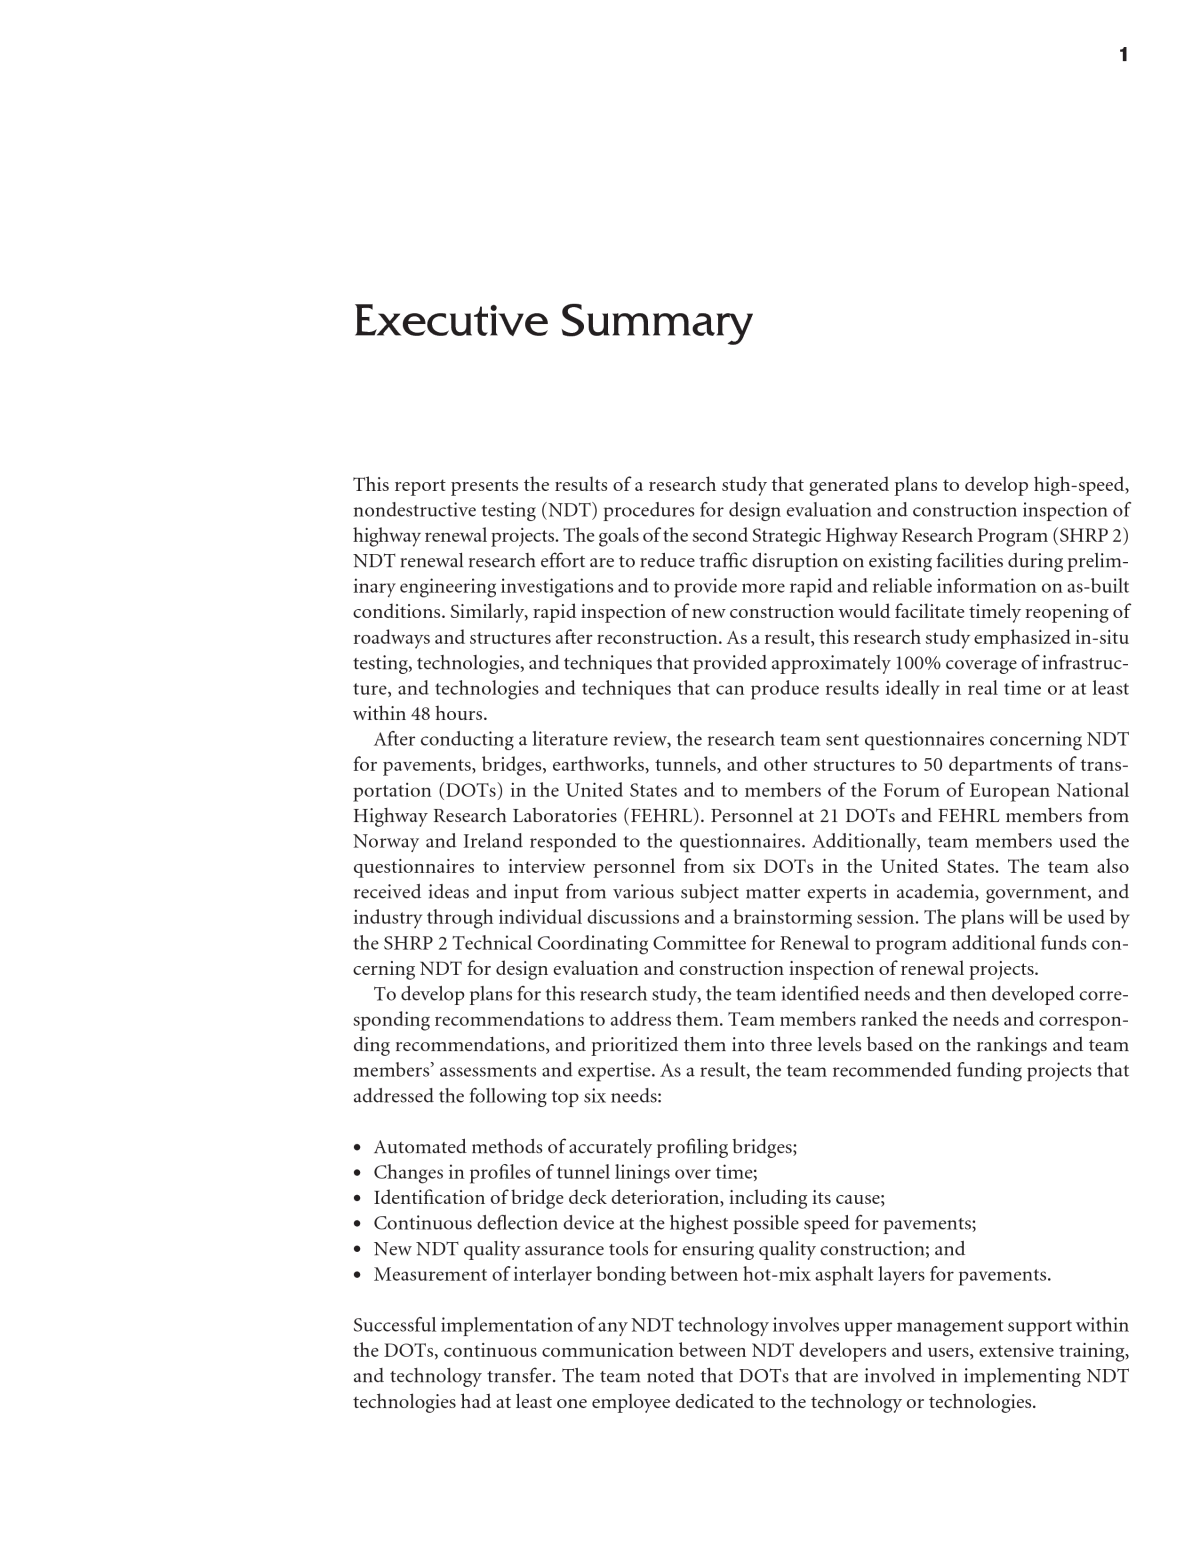 Executive Summary  A Plan for Developing High-Speed